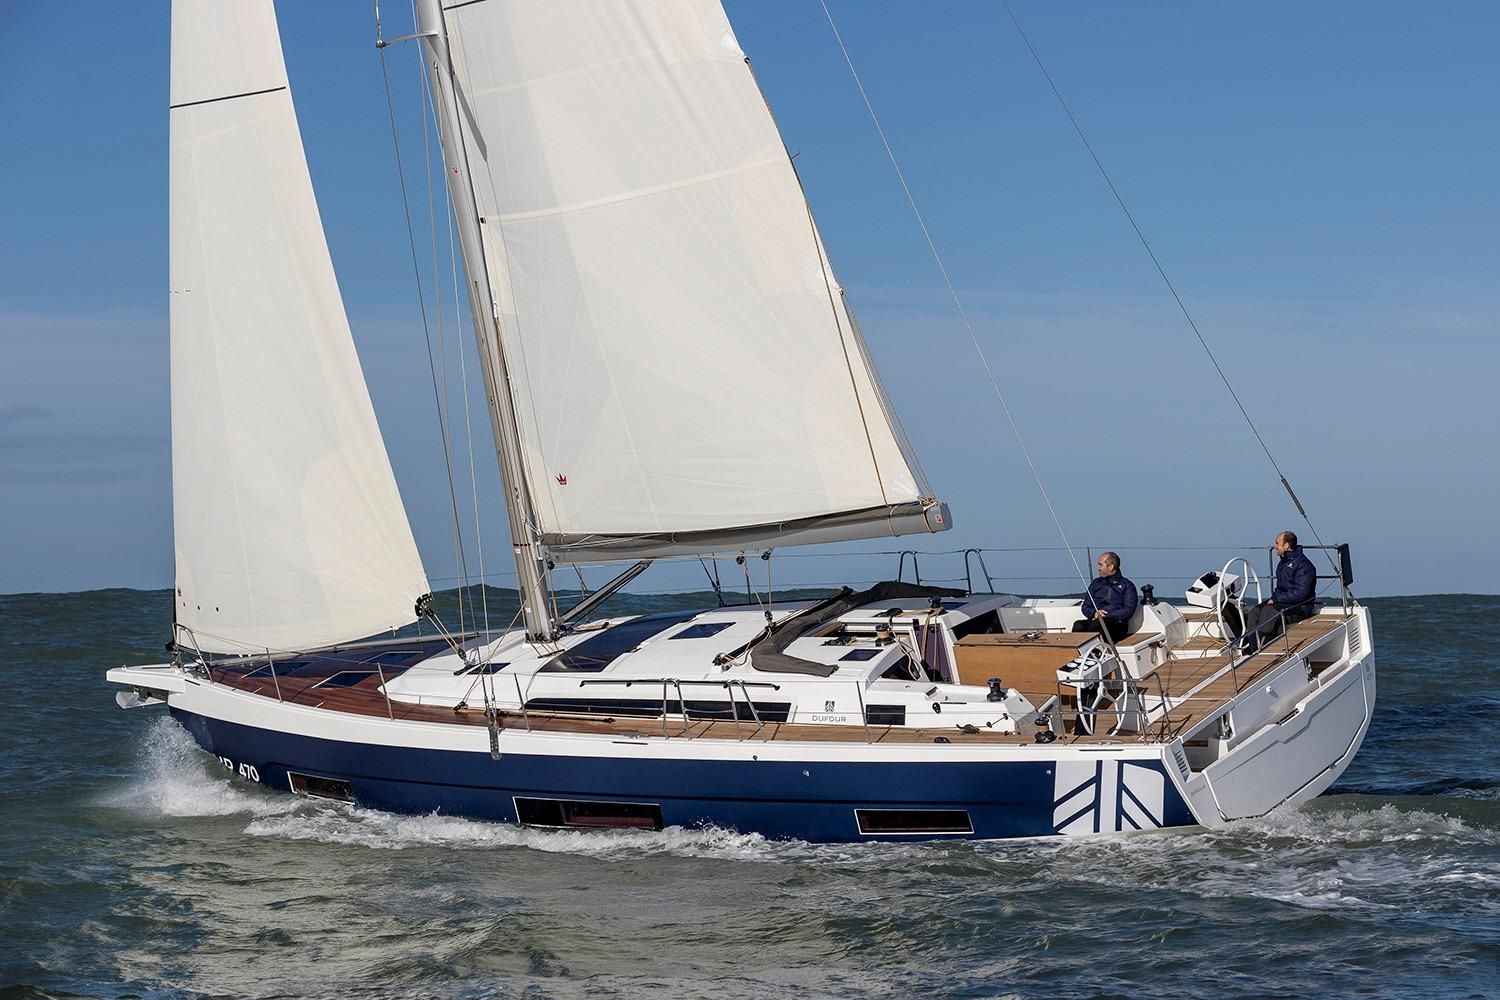 dufour yacht for sale uk